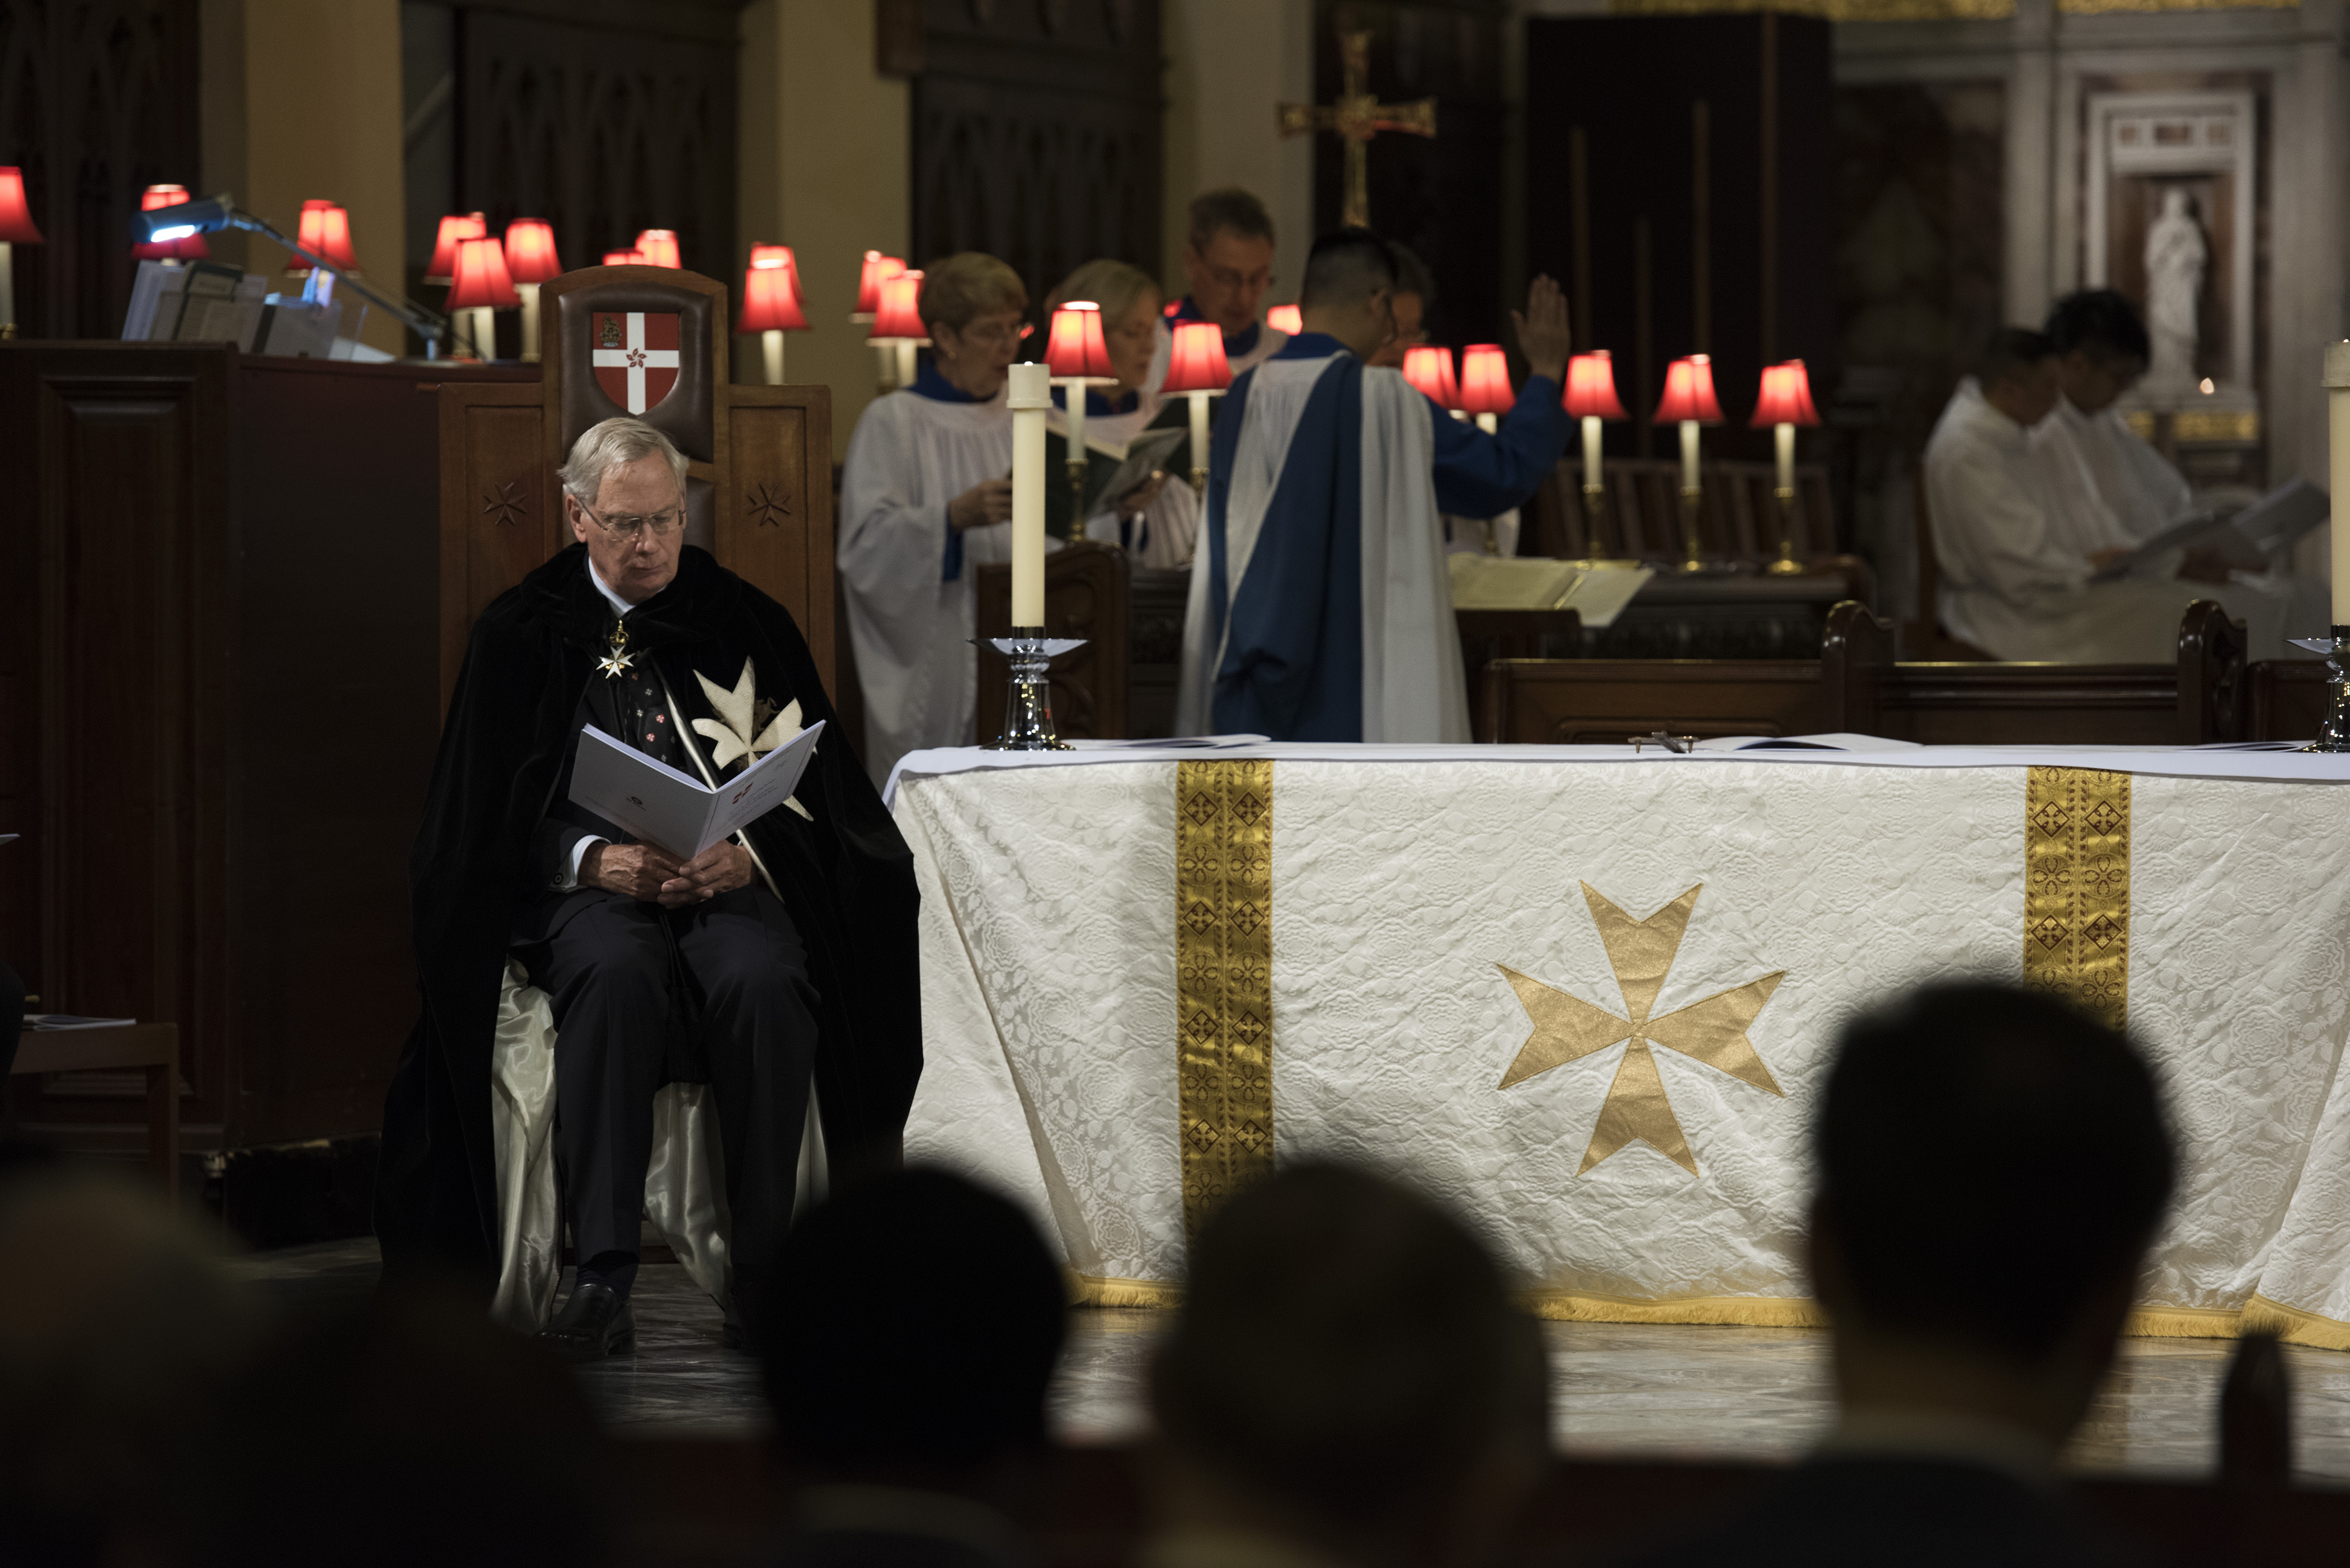 The Duke of Gloucester in Hong Kong Cathedral